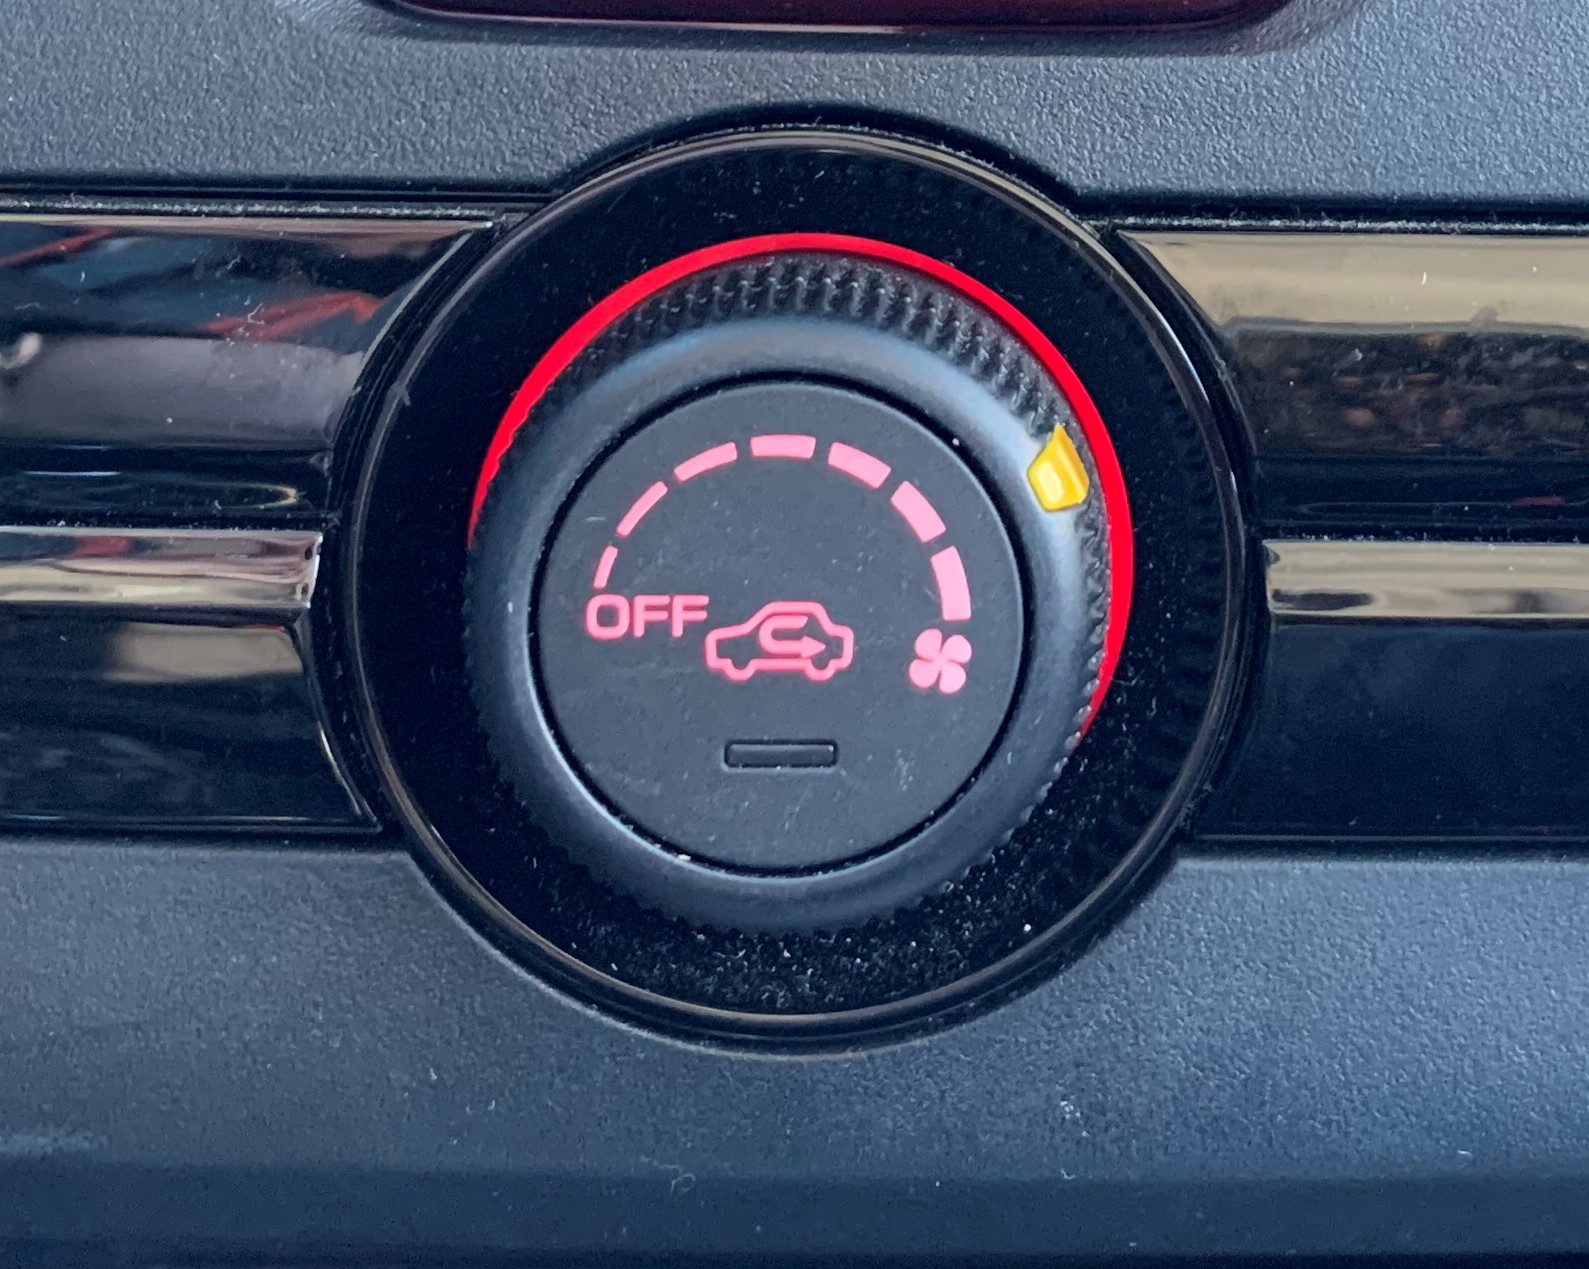 What Does The Recirculate Button Do?